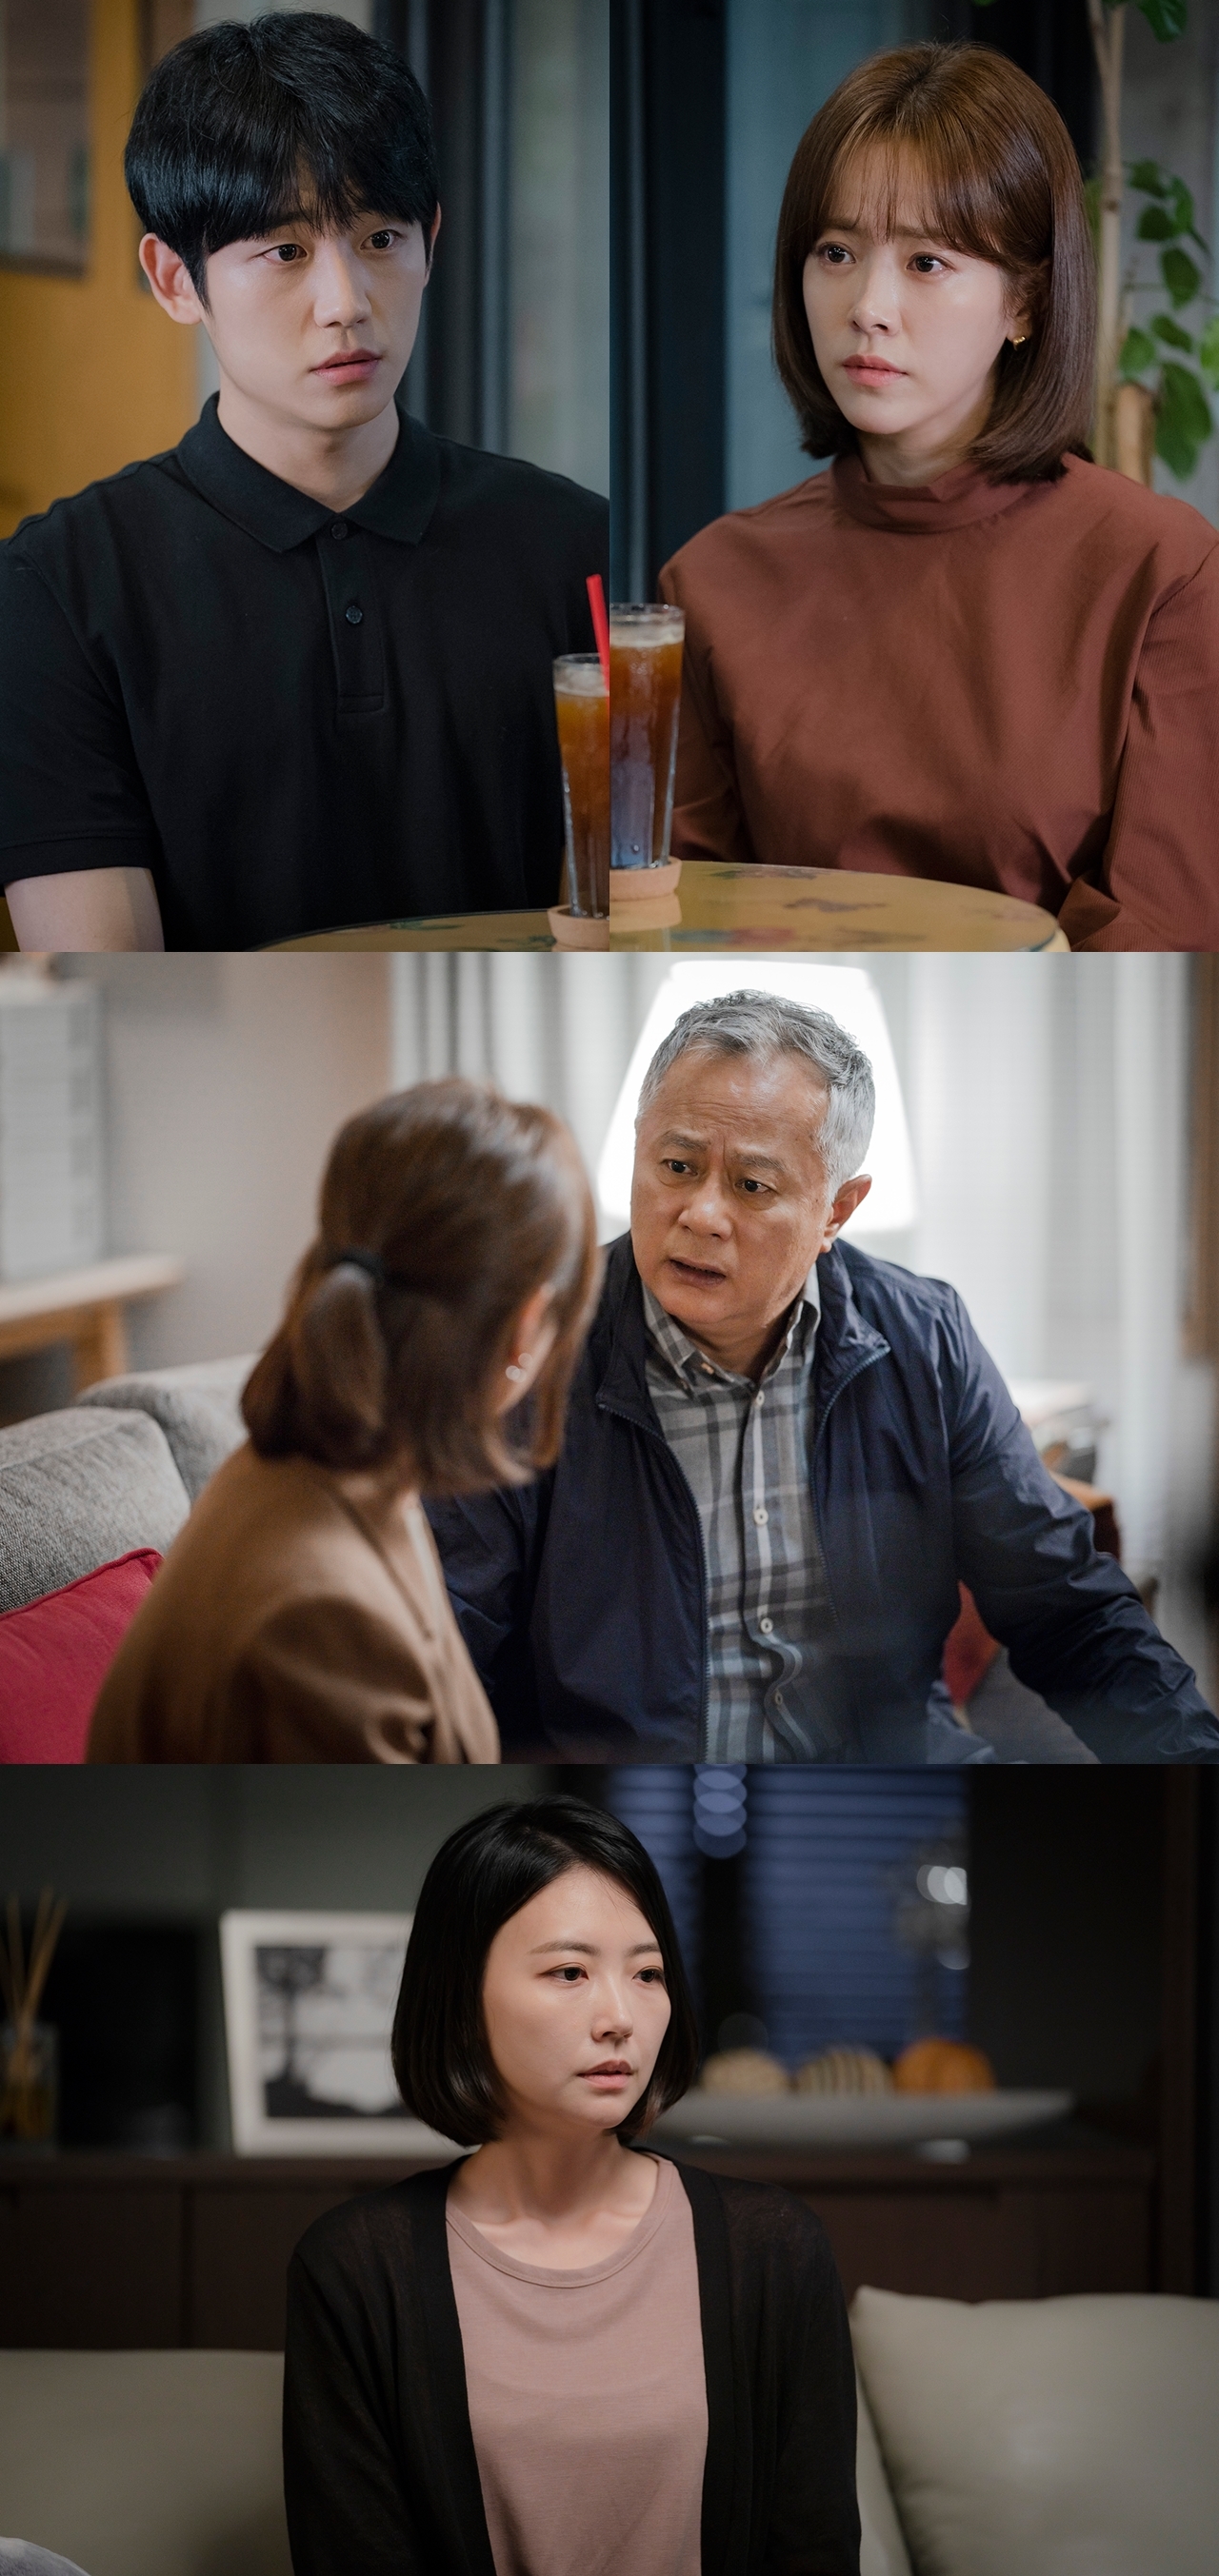 Seoul) = Spring Night will convey a deep echo to the house theater until the end.MBCs tree drama Spring Night (playplayed by Kim Eun/directed Ahn Pan-seok) is only four times ahead this week.Another crisis is coming in front of the Why (Lee Jung-in + Yoo Ji-Ho) couple, who have been feeling for each other in the opposite direction, and attention is focused on whether the two people will be able to meet Happy Endings.I looked at the point of observation that I should not miss until the end of what the story of Spring Night will end.The news of his son Yoo Eun-woo (Hian), who was always calm and unwavering, but suddenly heard, revealed his anxiety.In the end, Yoo Ji-Ho exploded his anxiety toward Lee Jung-in (Han Ji-min) in a drunken mood, and Lee Jung-in felt confused by his words.The audience is increasingly curious about whether the two people who are happy and depend on each other will overcome anxiety in their hearts and find laughter again.Lee Tae-hak (Song Seung-hwan) has hoped that his daughter Lee Jung-in will marry Kwon Ki-seok (Kim Jun-han), the son of the chairman.However, Lee Jung-in is angry that he meets the single daddy Yoo Ji-Ho after breaking up with Kwon Ki-seok, and he asserted that he can never admit the relationship between the two.Yoo Ji-Hos mother Ko Sook-hee (Kim Jung-young) also shared her heartfelt heart with Lee Jung-ins mother Shin Hyung-sun (Gil Hae-yeon), who happened to meet while she was unable to give a worried look toward the two.With the warm comfort and sincerity of the two mothers, it is noteworthy whether Lee Jung-in and Yoo Ji-Ho will overcome Lee Tae-haks opposition and meet a Happy Endings.The fact that there was a pain in the marriage of Seo-young Lee (Lim Sung-hyun) came to the audience as well as the family.It was revealed that she made a decision to write the last method after continuing the conflict with Nam Si-hoon (Lee Mu-saeng), who had not insisted that she could not divorce only earlier.As the question of how the Seo-young Lee will divorce is growing, the support of viewers is continuing in her solo stand.The deep sensitivity of Spring Night, which evokes empathy for various stories that can not be missed until the end, and the melodic chemistry of Han Ji-min and two actors Jung Hae-in will be added, and the emotional melodrama will convey a deep feeling to viewers.The Spring Night, which has become a life drama with a romantic sympathy with deep emotions and realistic stories, ends with the broadcast on the 11th.